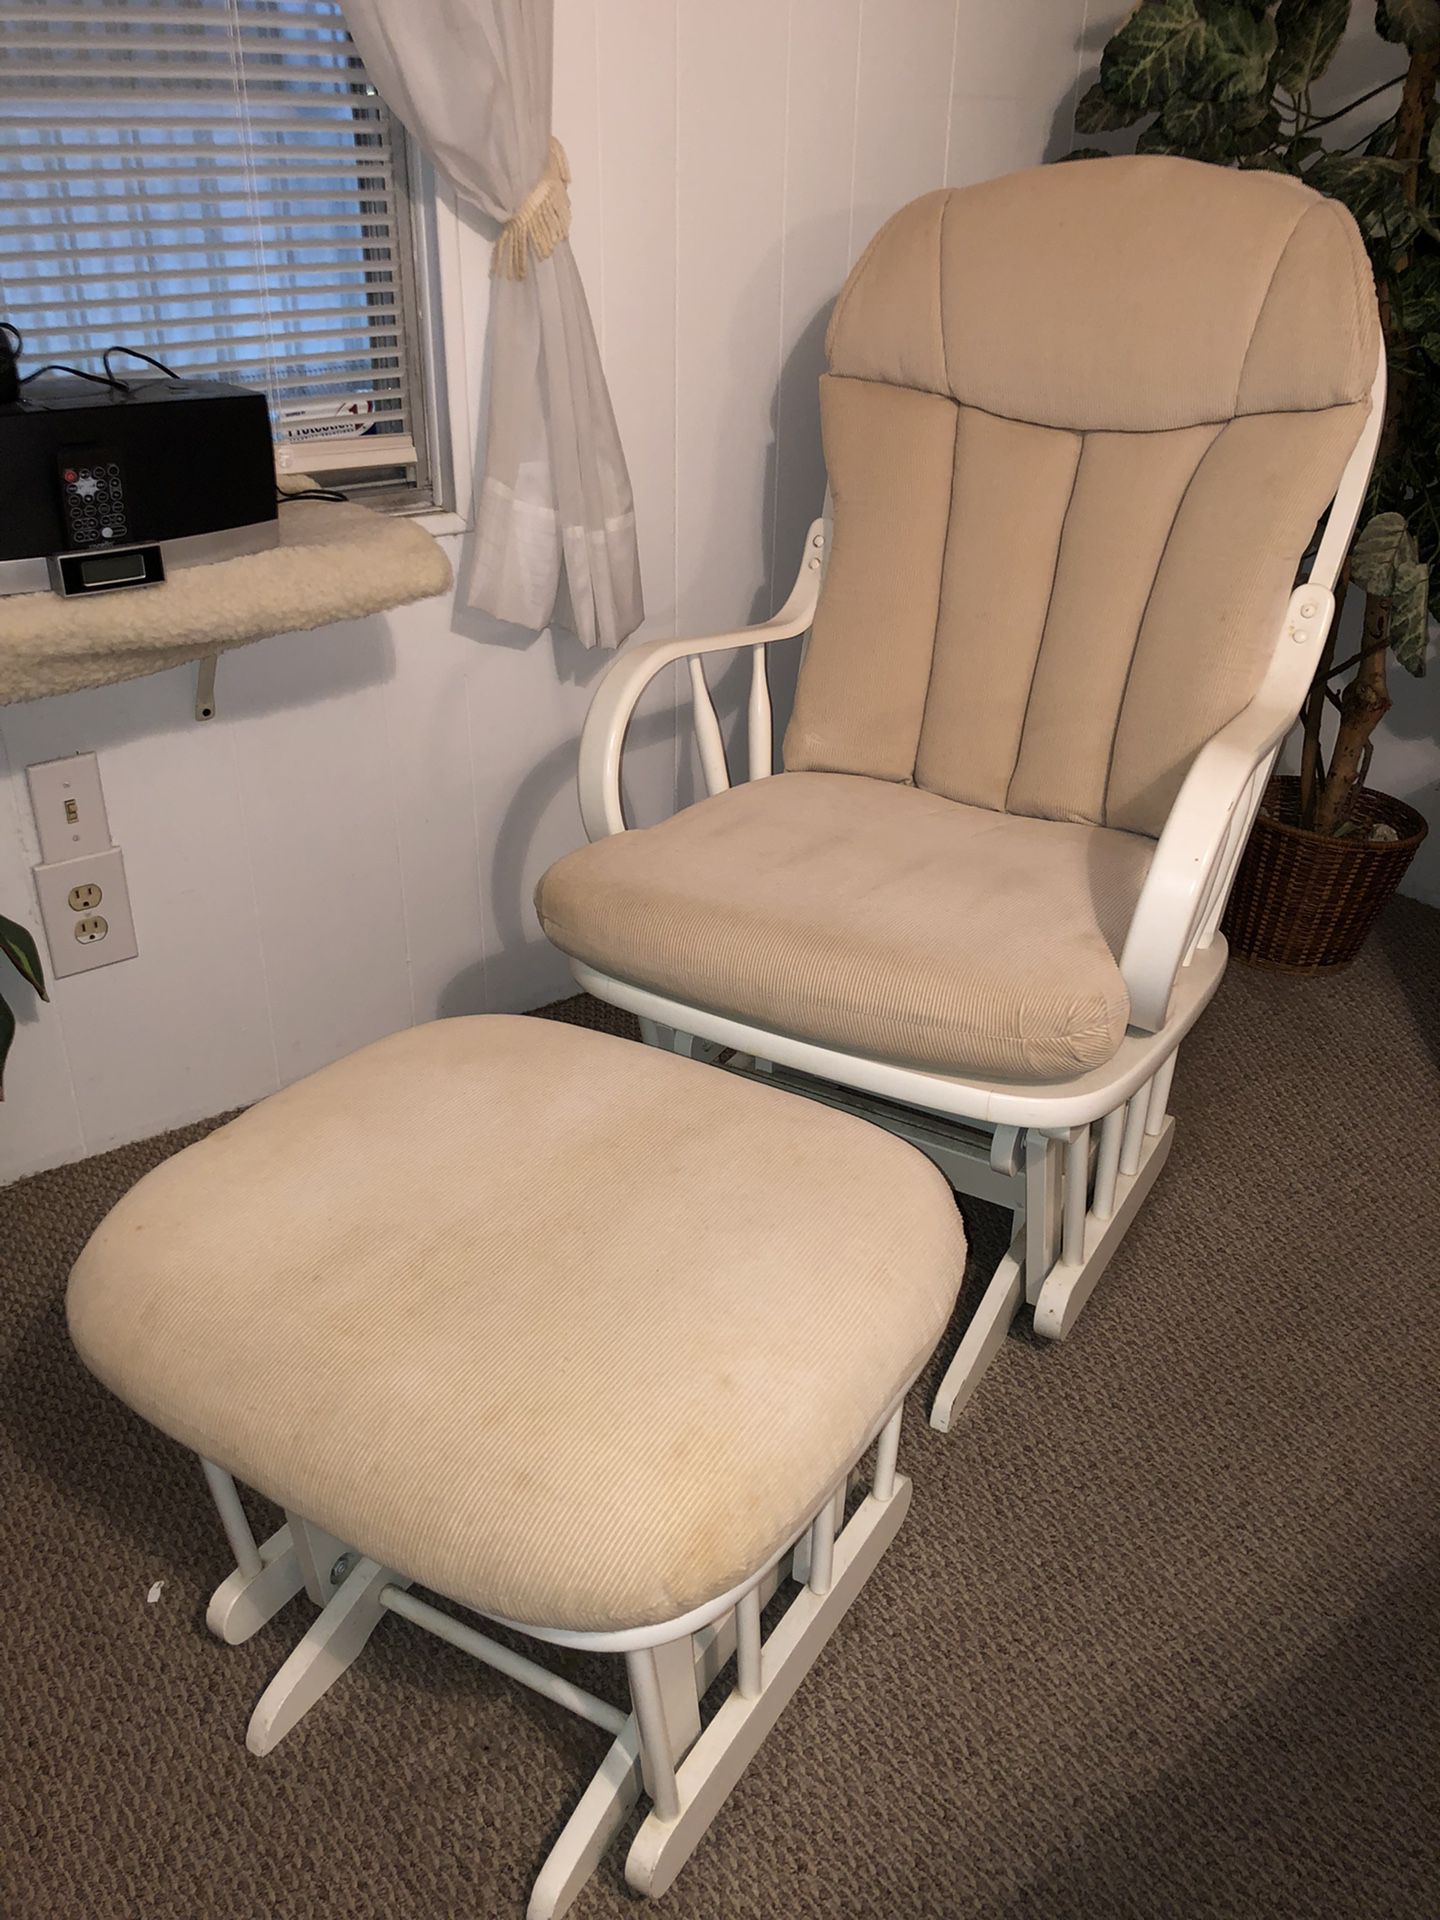 Easy glide rocking chair with ottoman